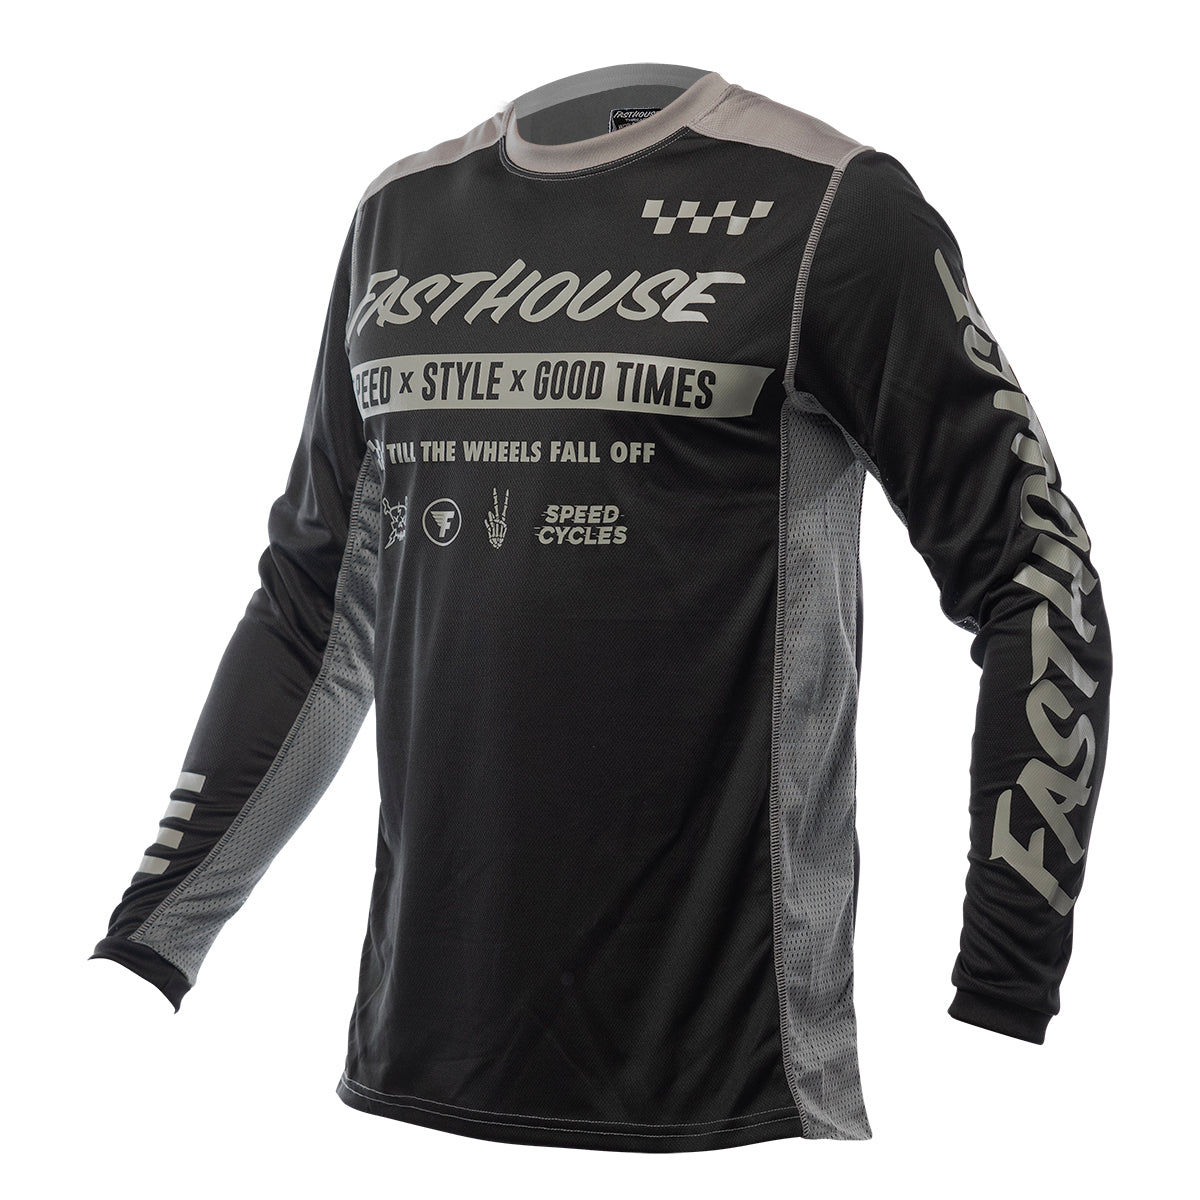 Grindhouse Domingo Jersey - Black – Fasthouse